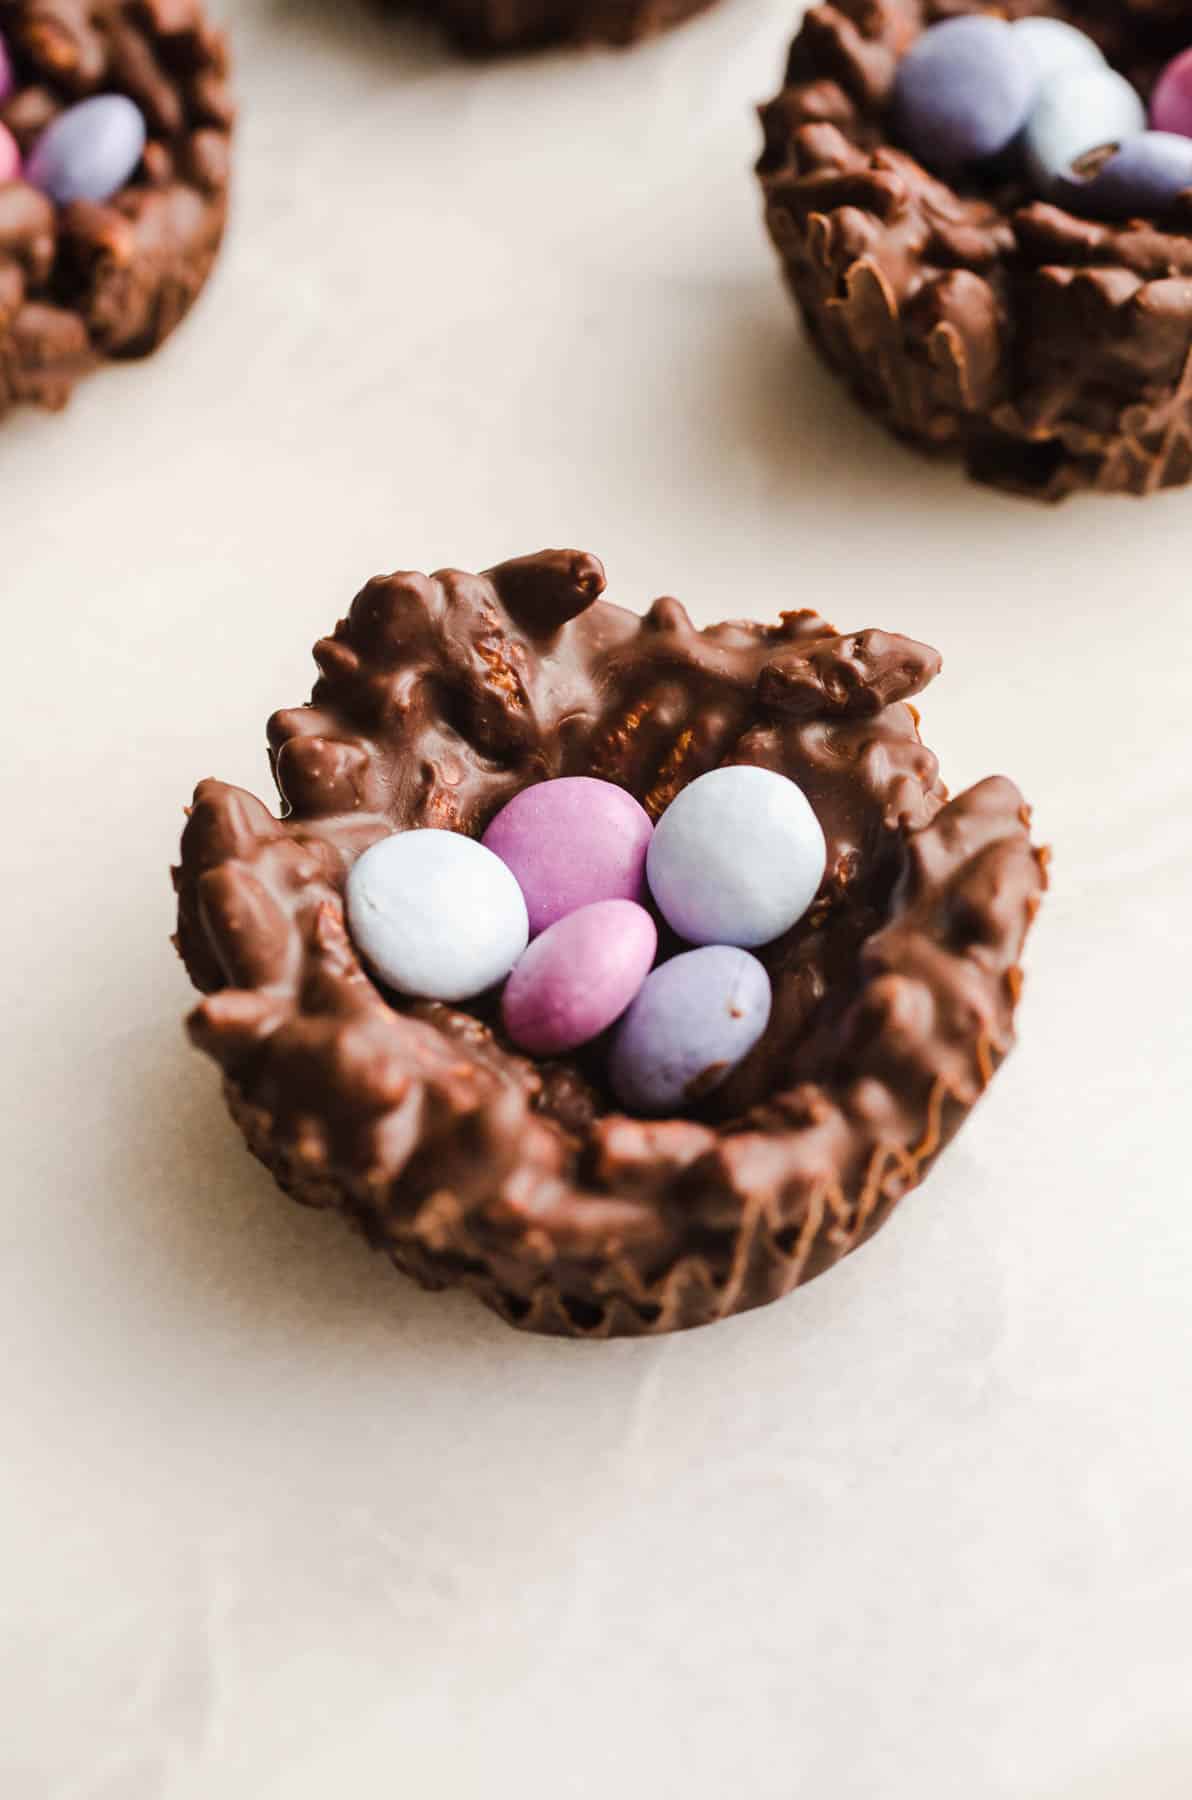 A chocolate nest cookie with chocolate gems.